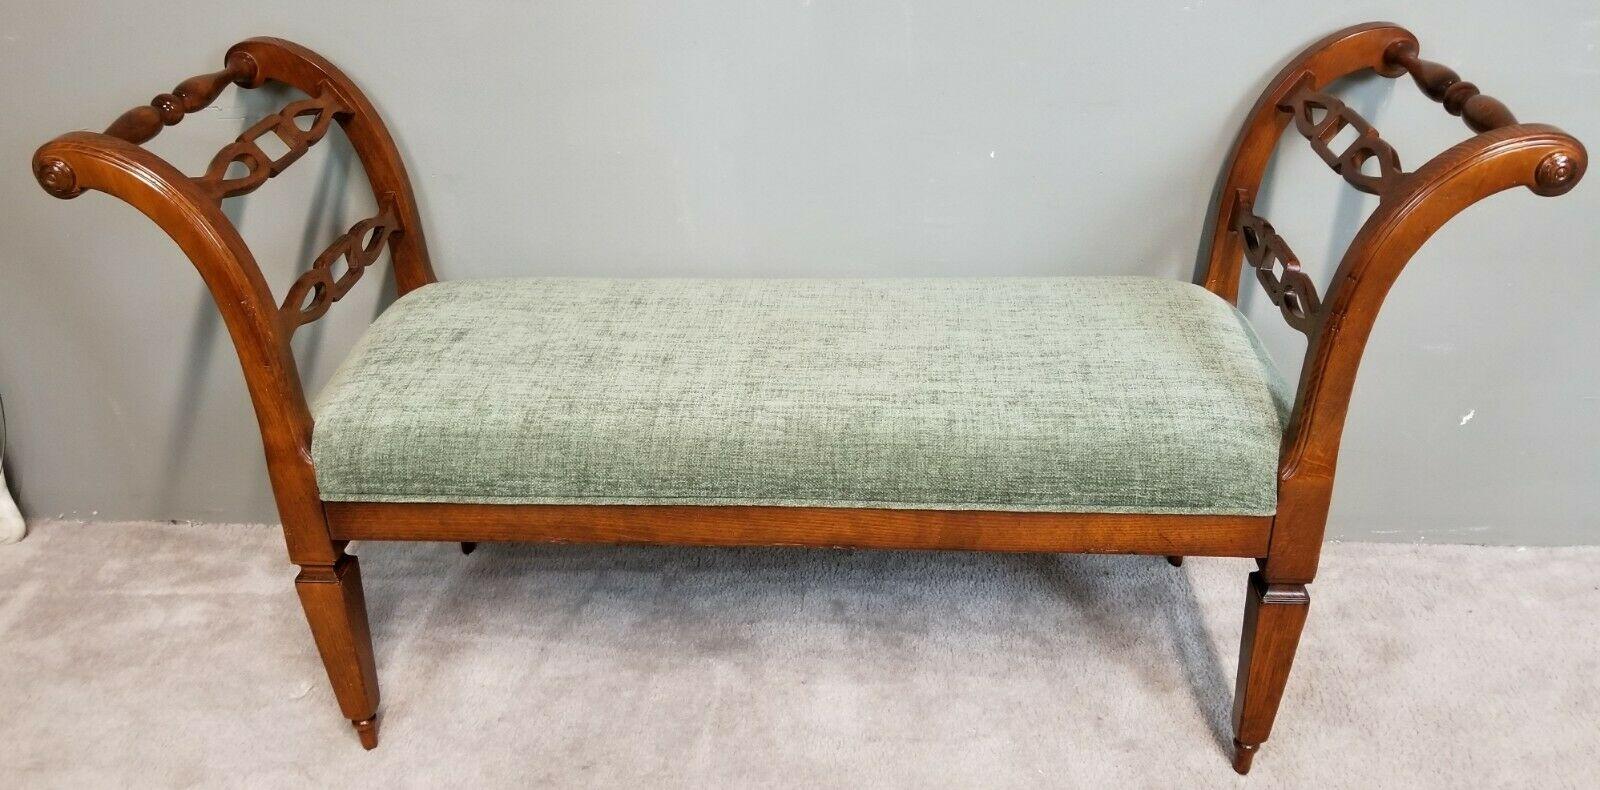 Offering one of our recent palm beach estate fine furniture acquisitions of A 
Lovely Baker Italian Style Upholstered Bench.

Approximate Measurements in Inches
56 1/2